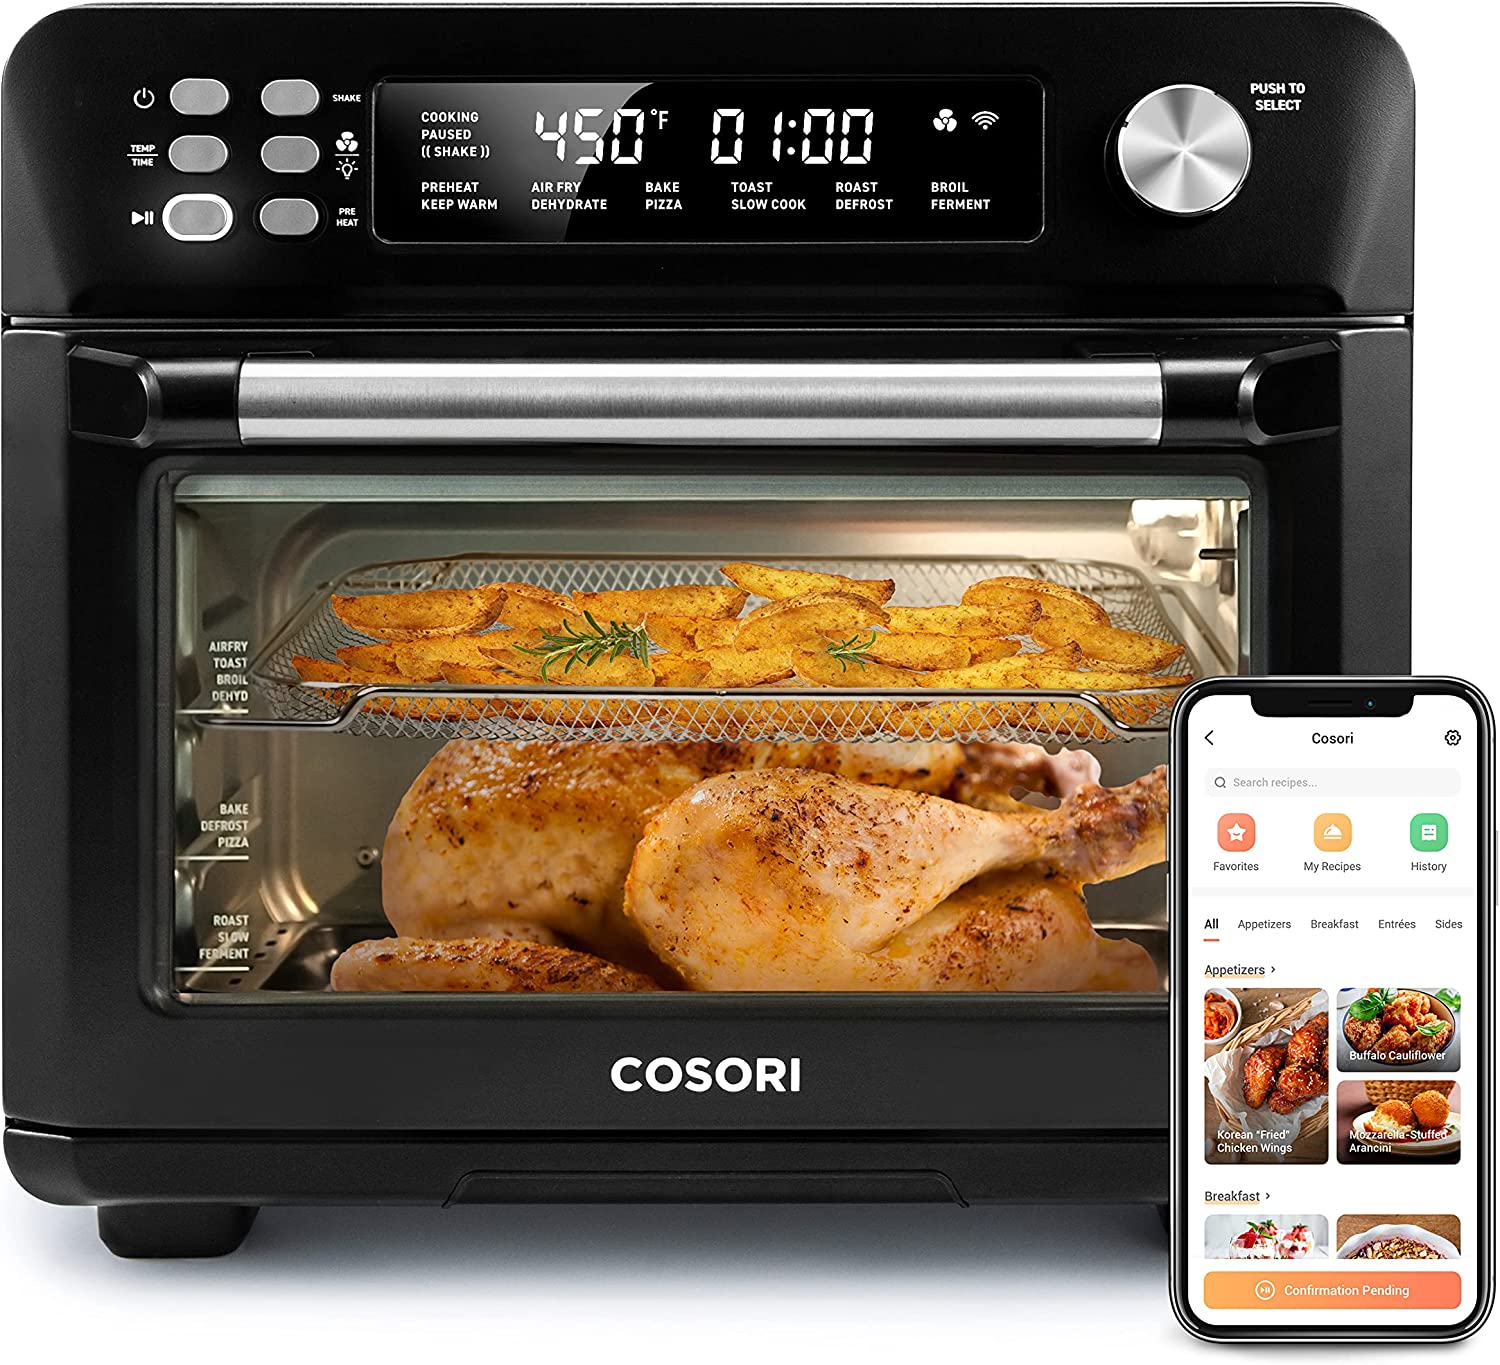 https://frenzhub.com/wp-content/uploads/2022/08/COSORI-Air-Fryer-Toaster-Oven-12-in-1-Convection-Oven-Countertop-with-Rotisserie-function.jpg